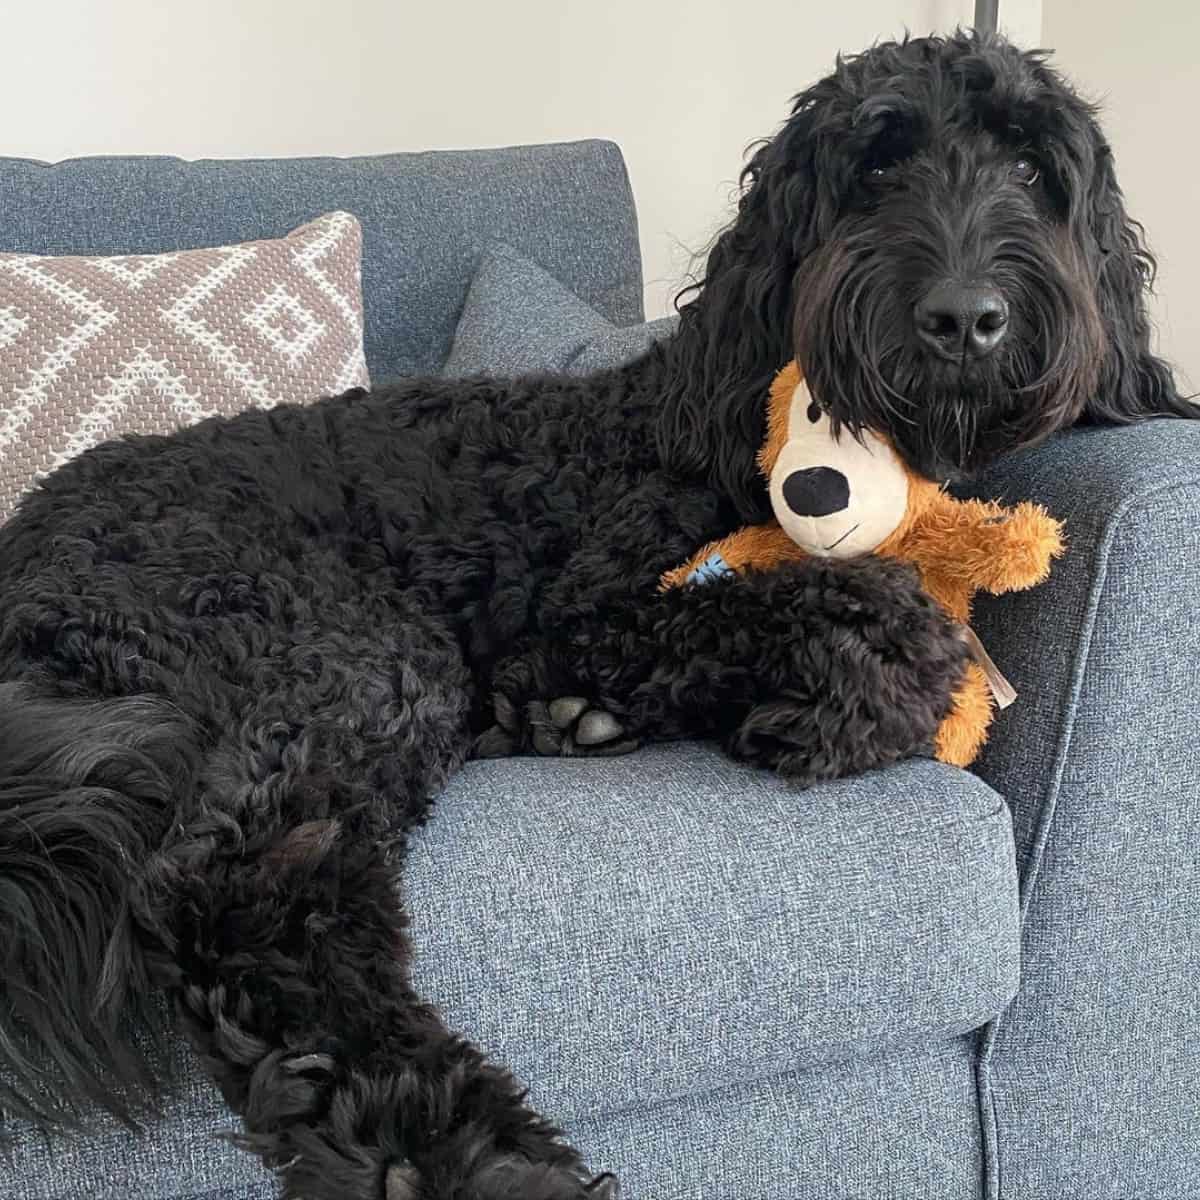 hugging a new toy